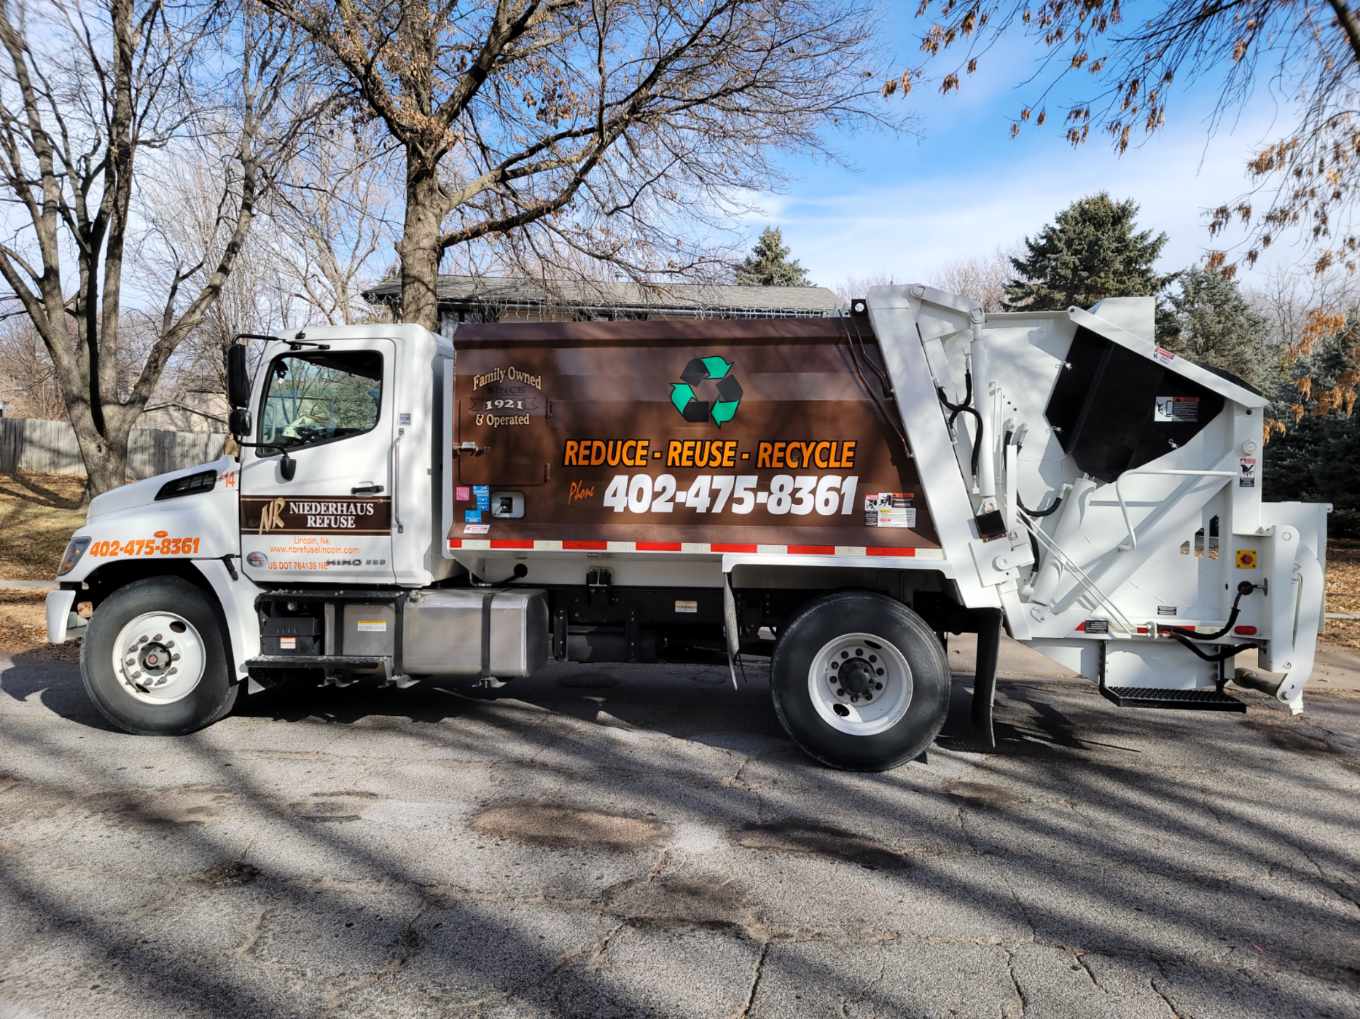 Waste and recycle truck ready for recycling services in Lincoln, NE